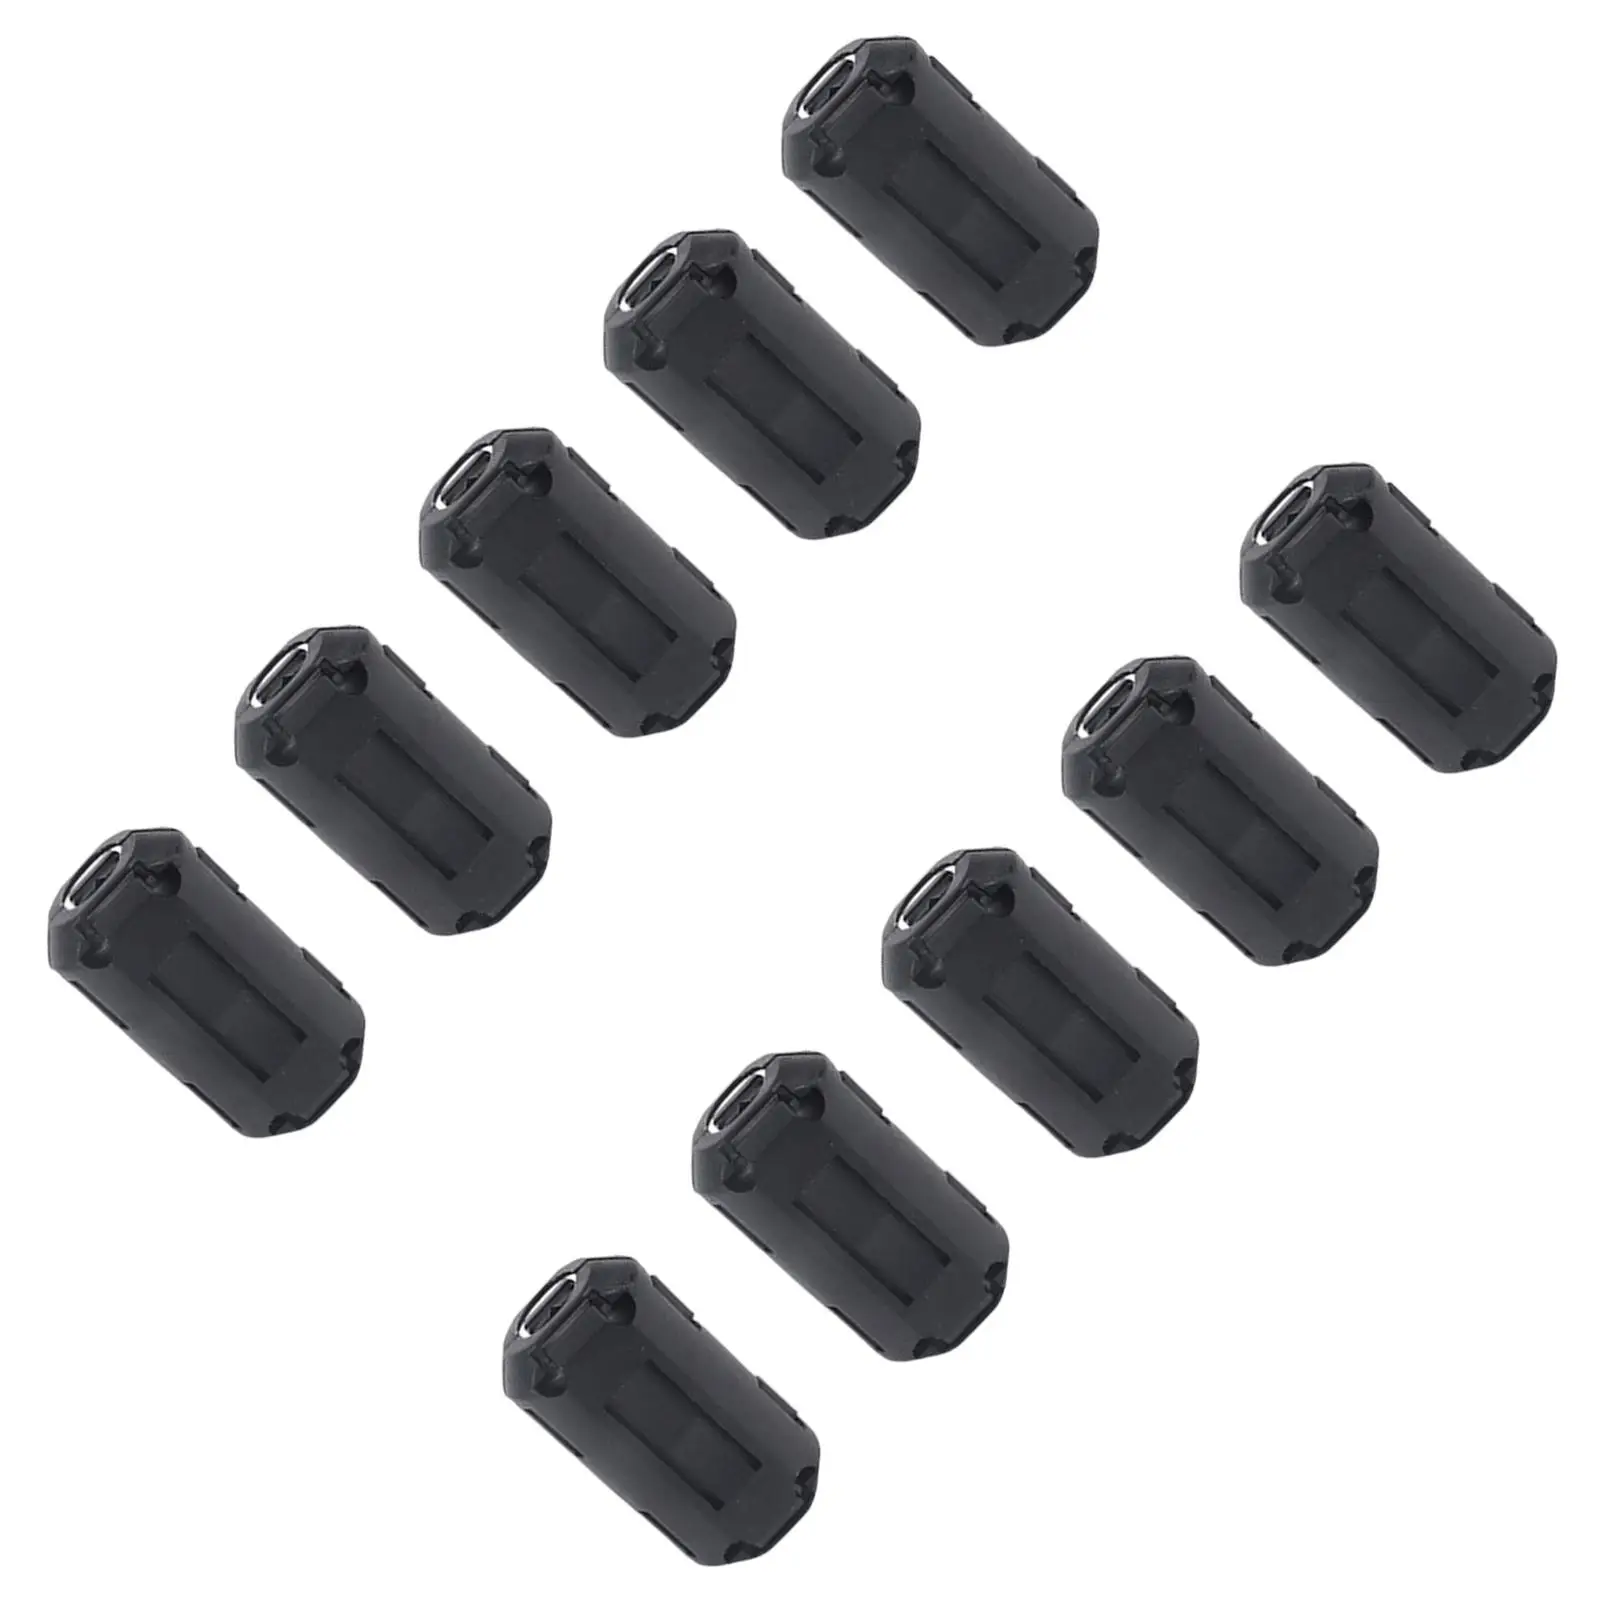 10Pcs Removable 13mm Ferrite Core Cord Rings Choke Bead Rfi Emi Noise Suppressor Filter for Cable Connector Filters Holder